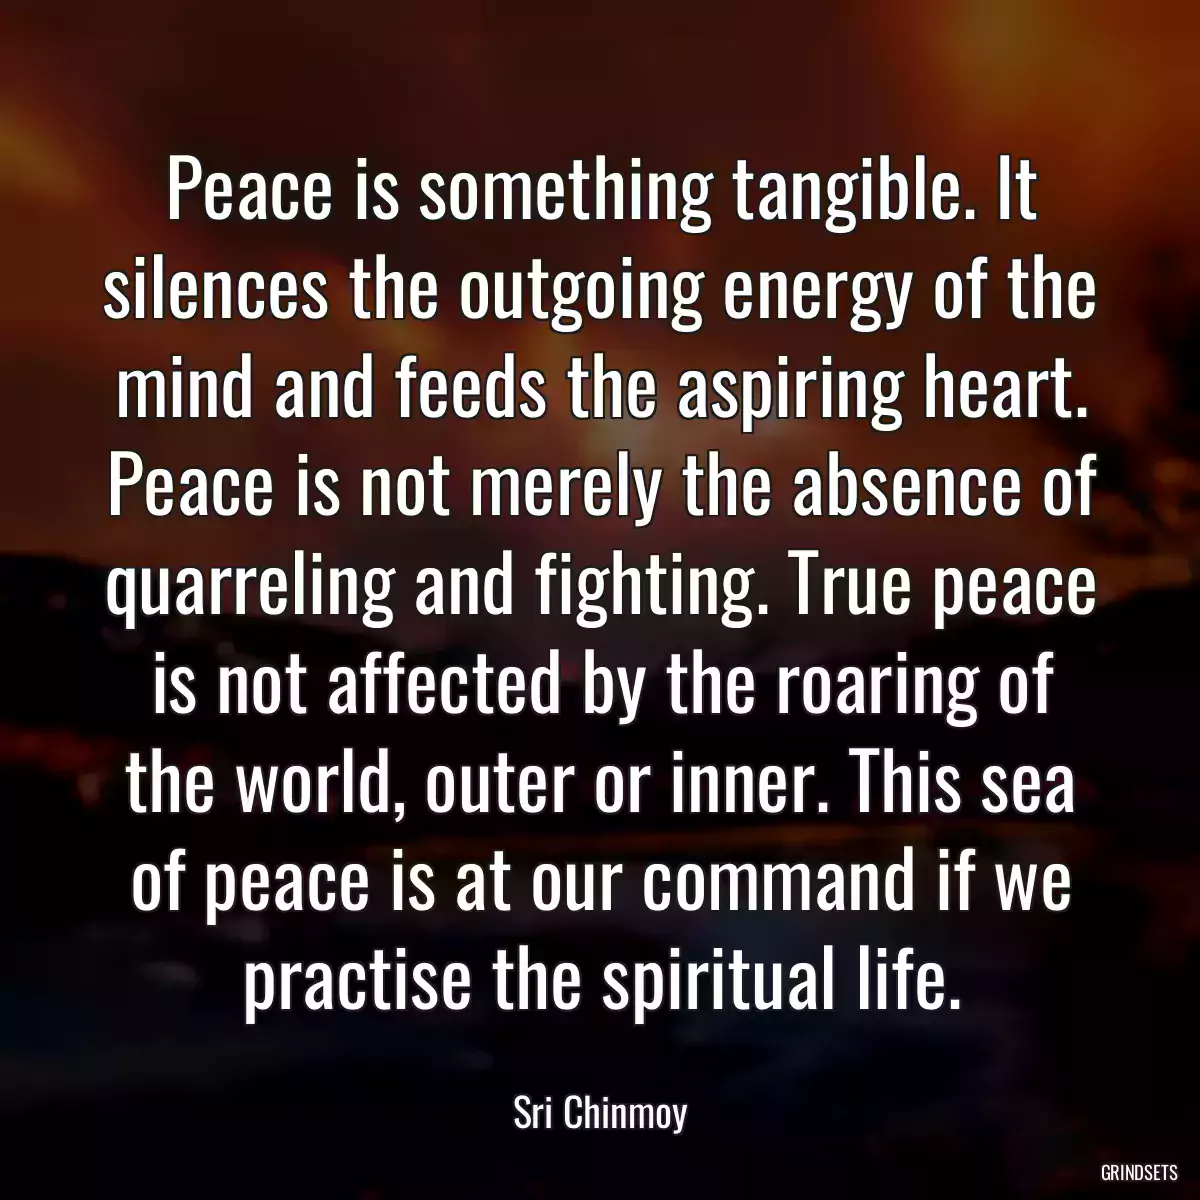 Peace is something tangible. It silences the outgoing energy of the mind and feeds the aspiring heart. Peace is not merely the absence of quarreling and fighting. True peace is not affected by the roaring of the world, outer or inner. This sea of peace is at our command if we practise the spiritual life.